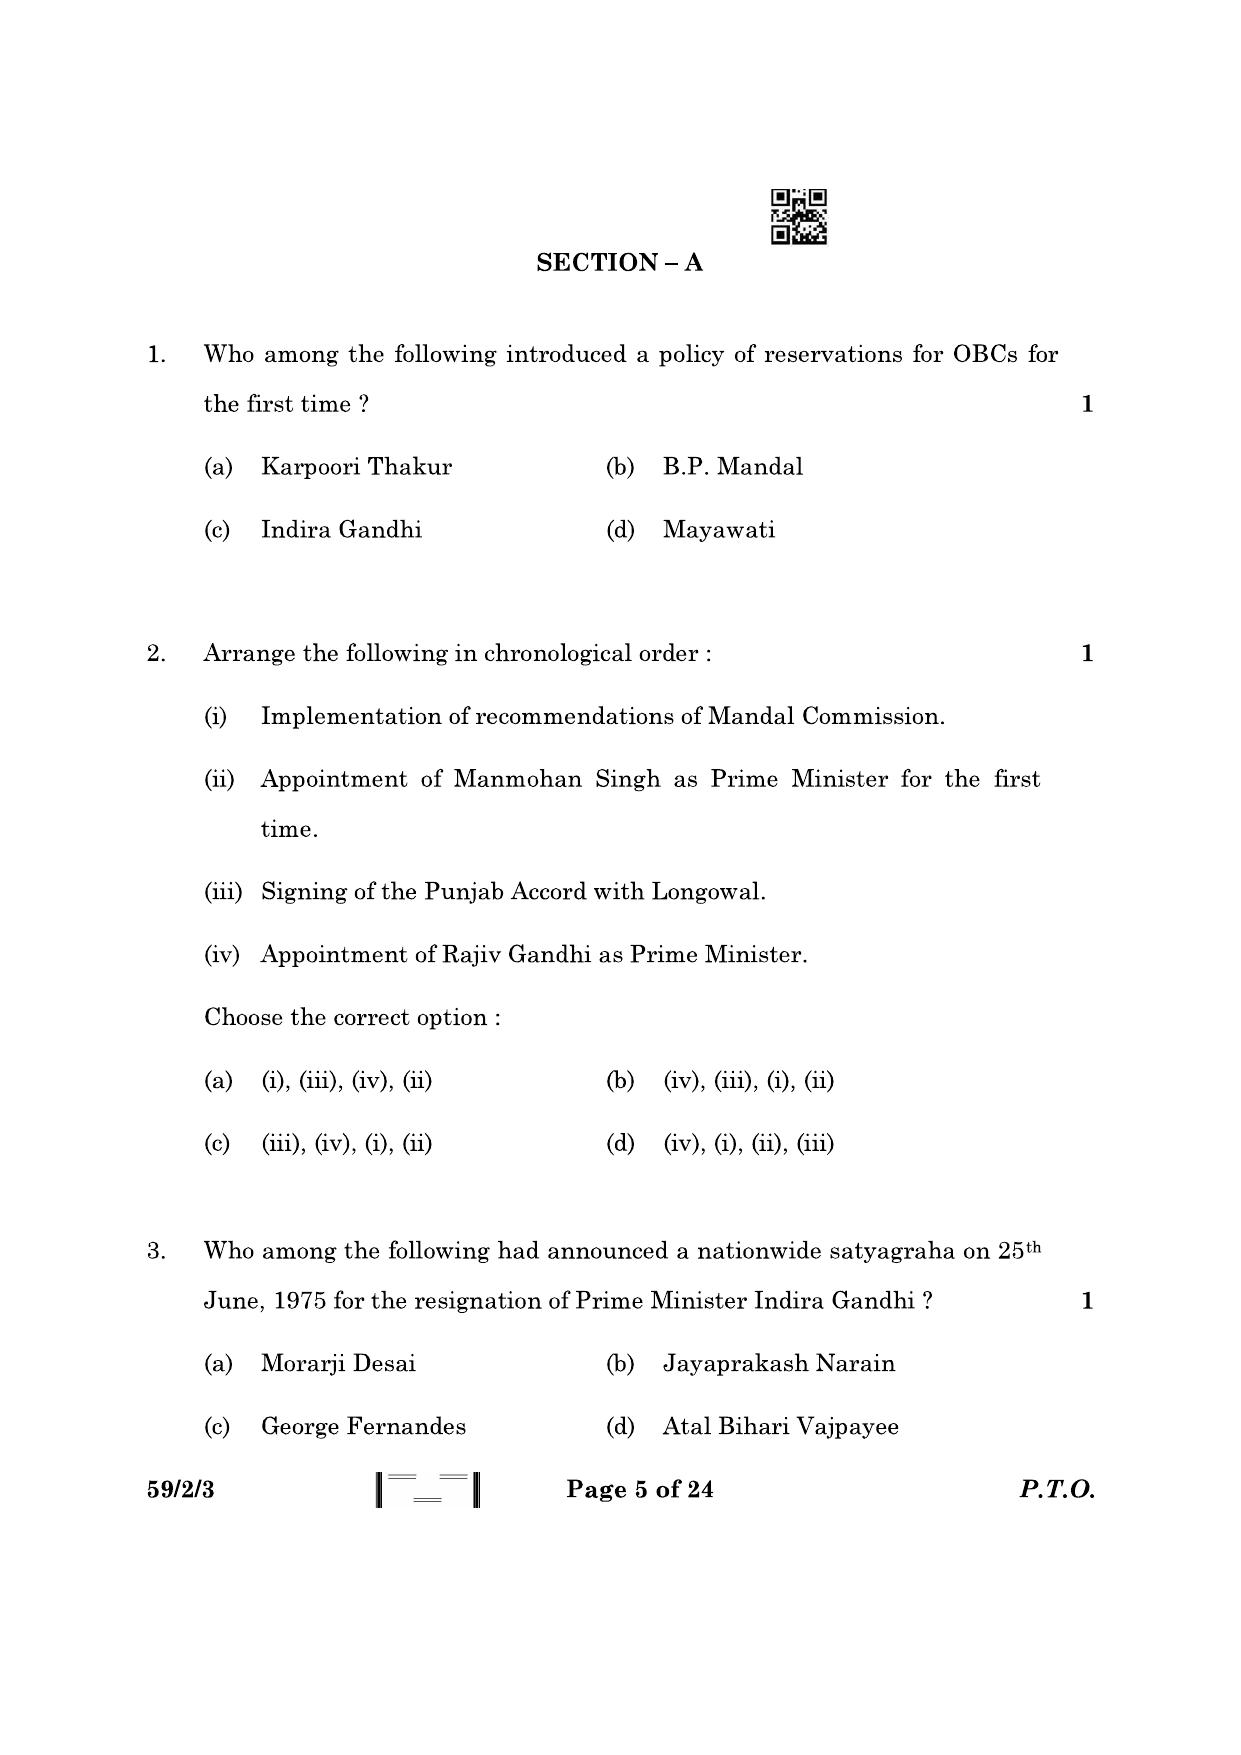 CBSE Class 12 59-2-3 Political Science 2023 Question Paper - Page 5